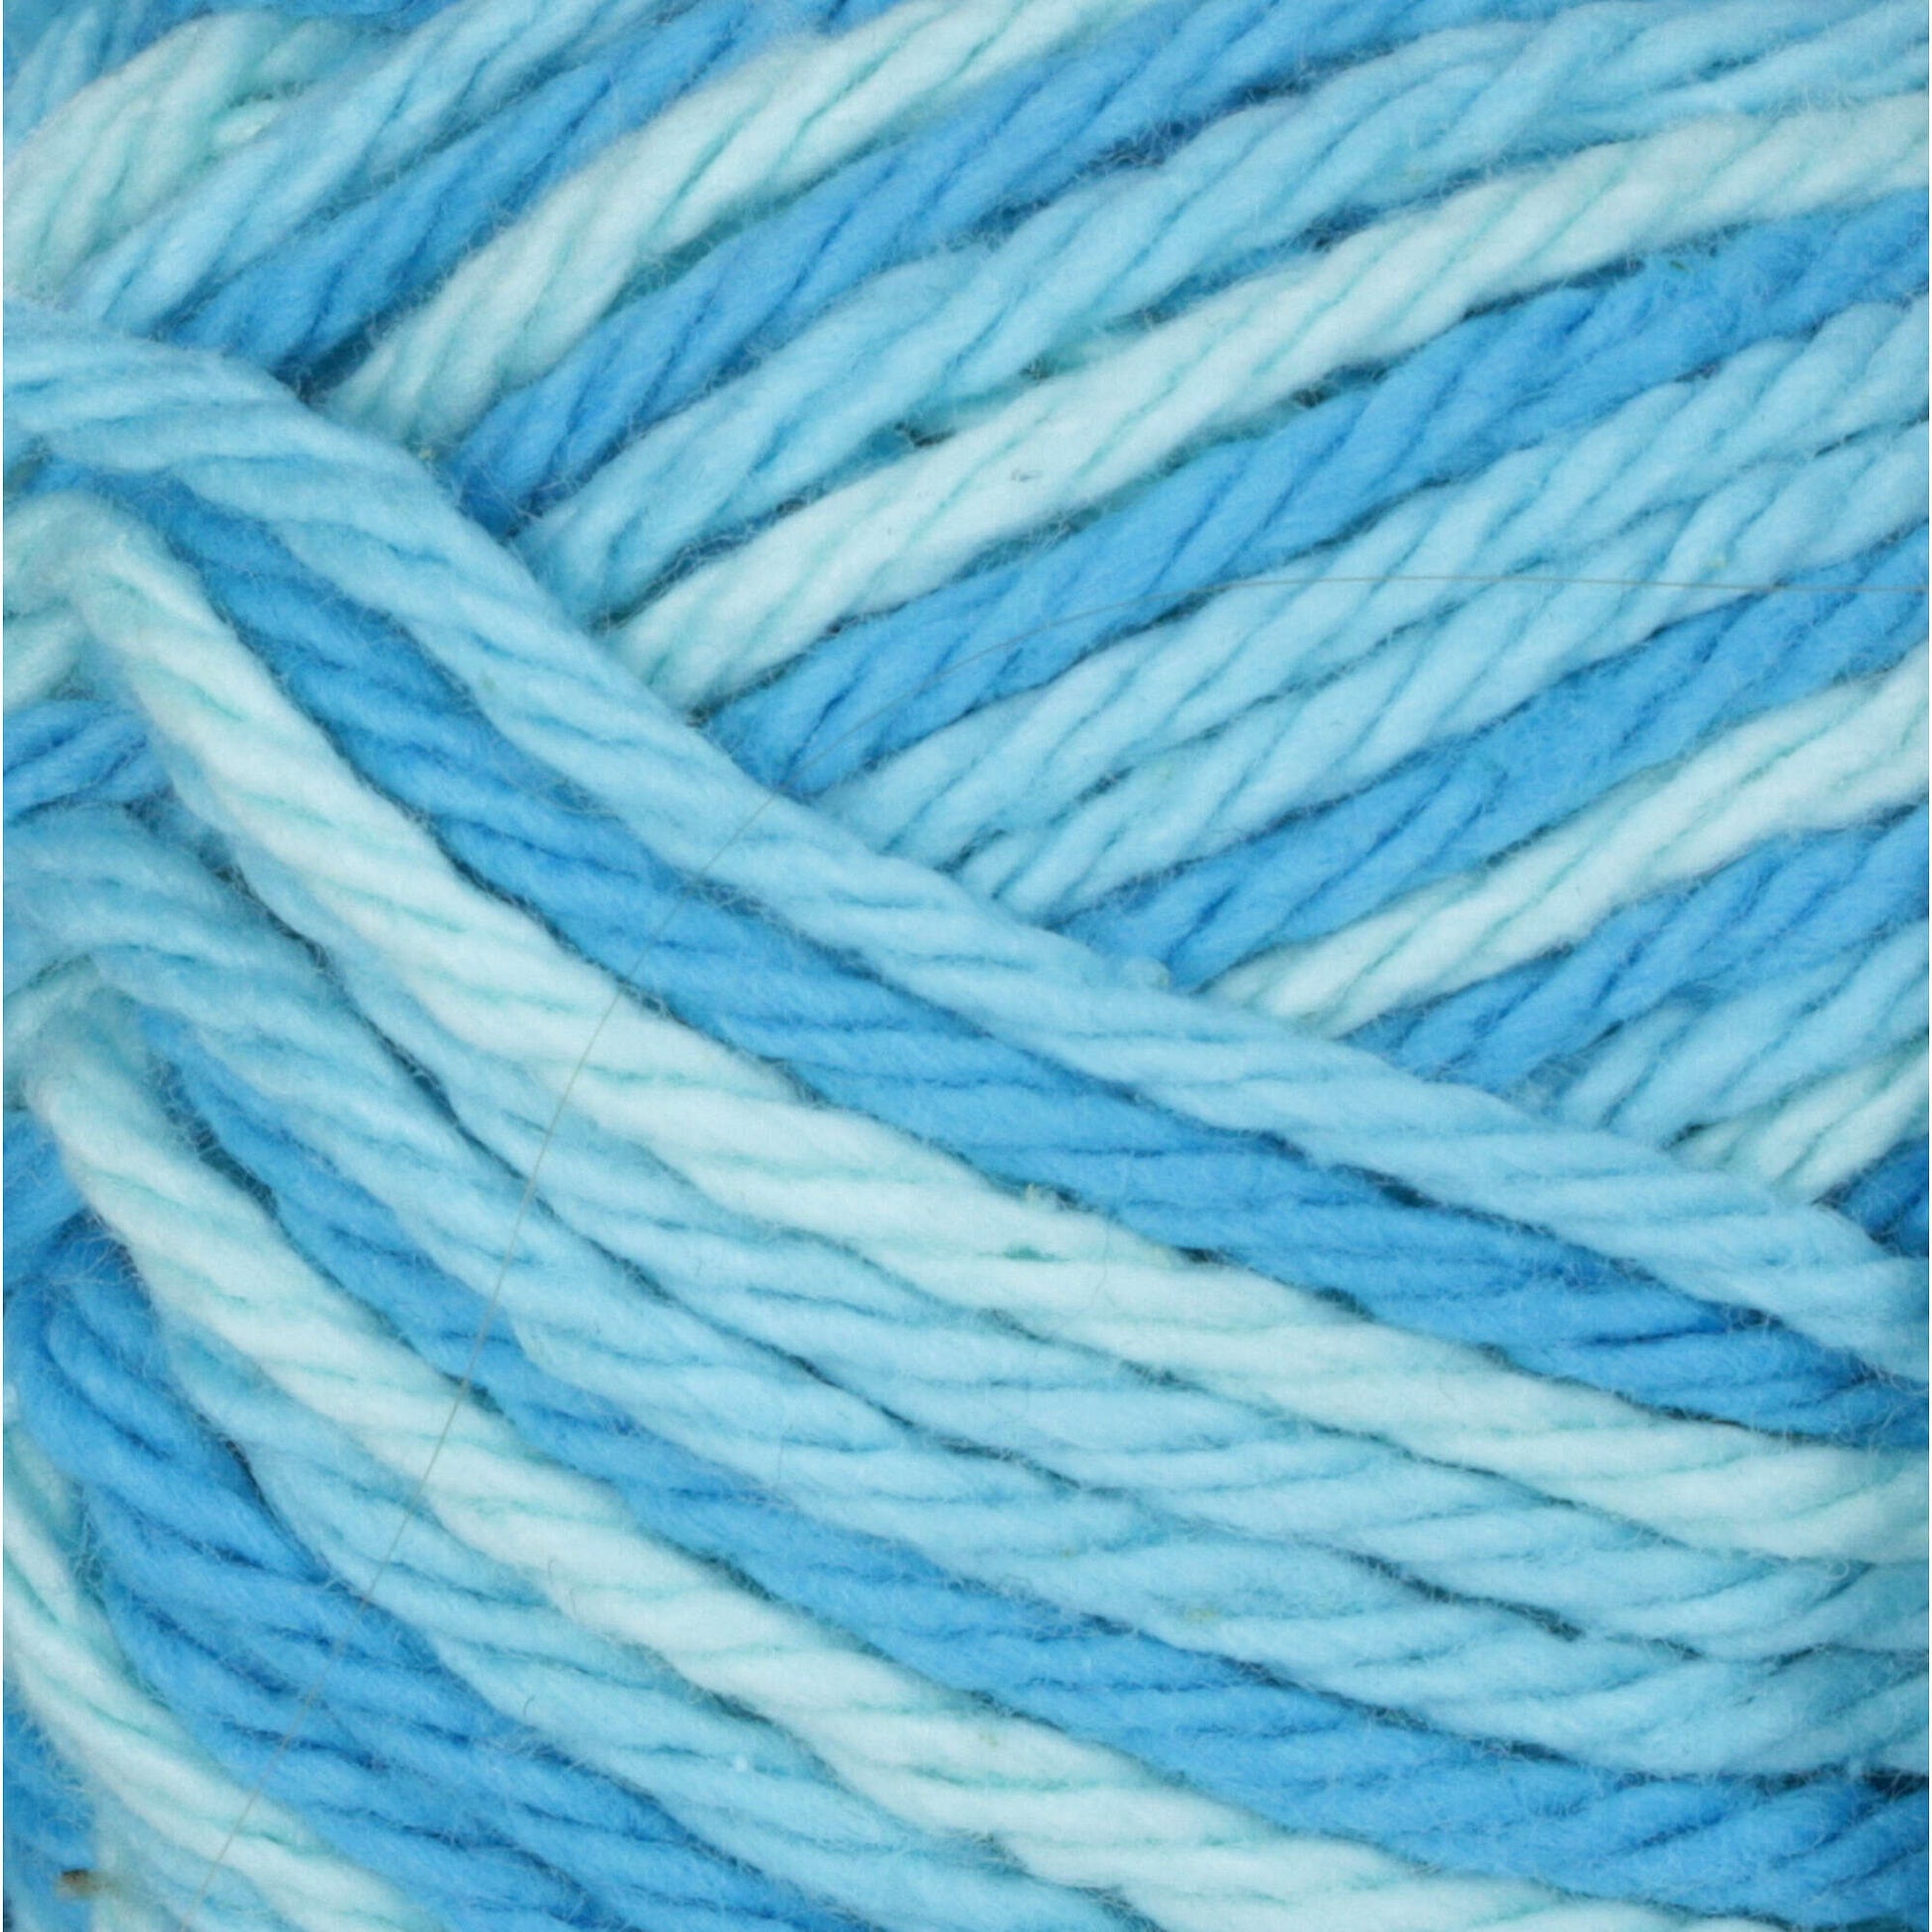 Bernat Handicrafter Cotton Ombres Yarn - Clearance Shades